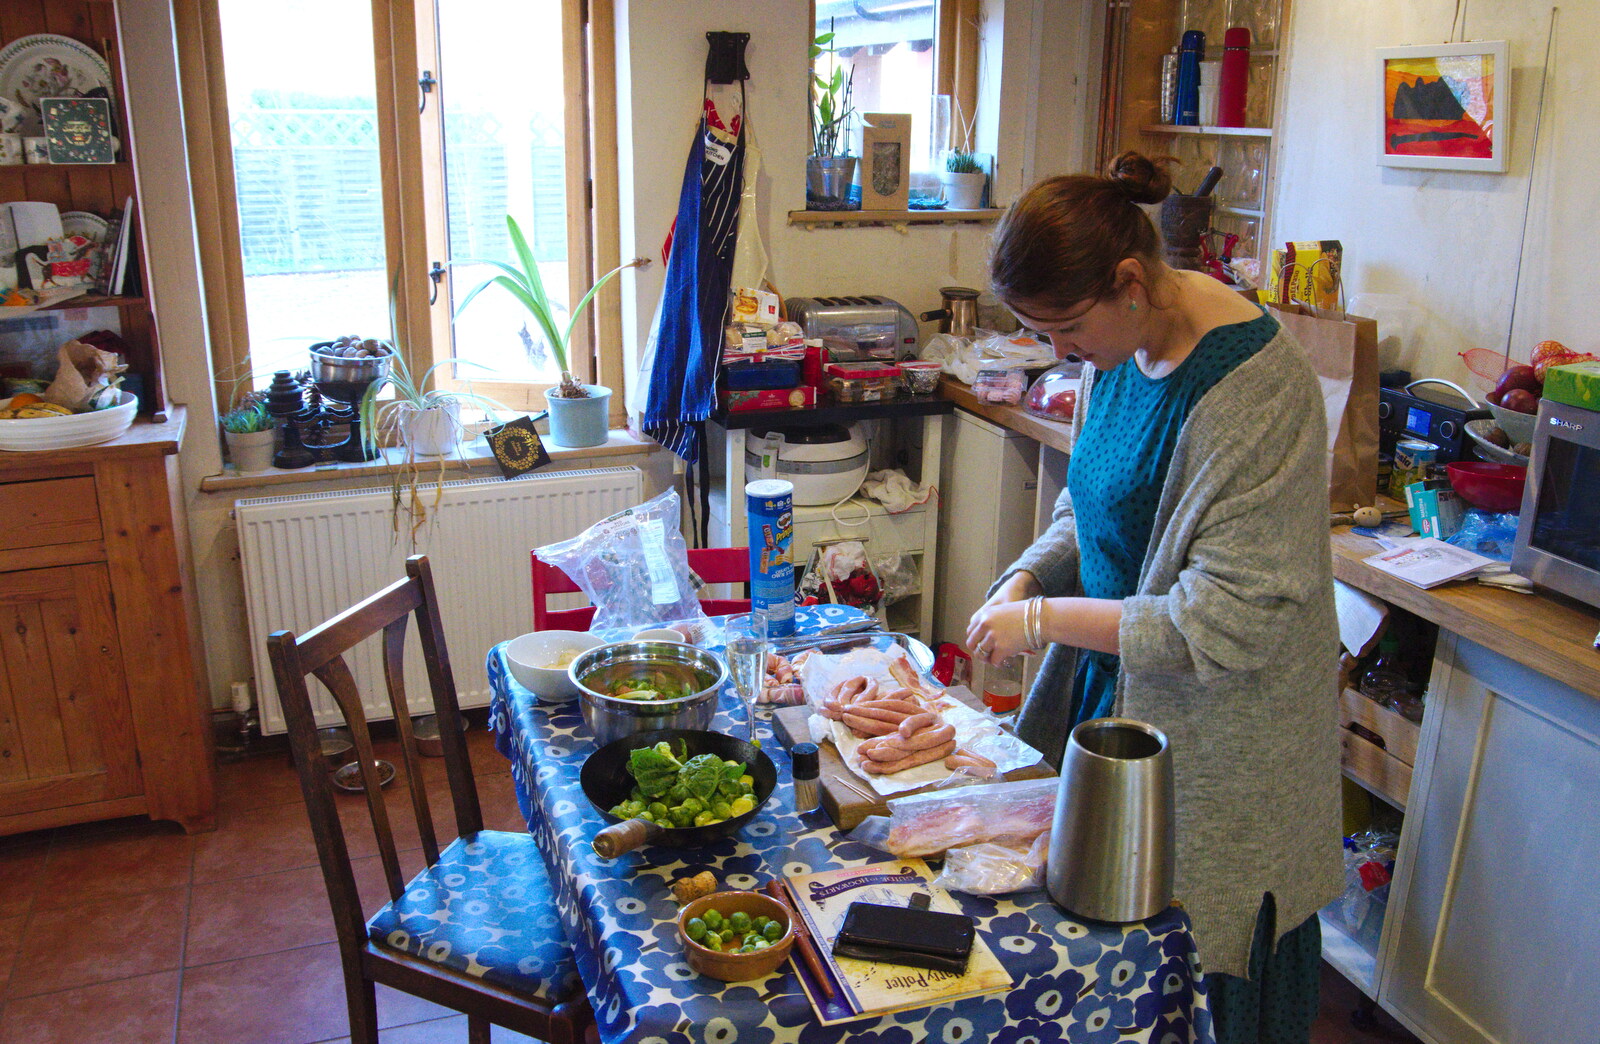 Back home, and Isobel is doing some food prep from Christmas Day, Brome, Suffolk - 25th December 2019